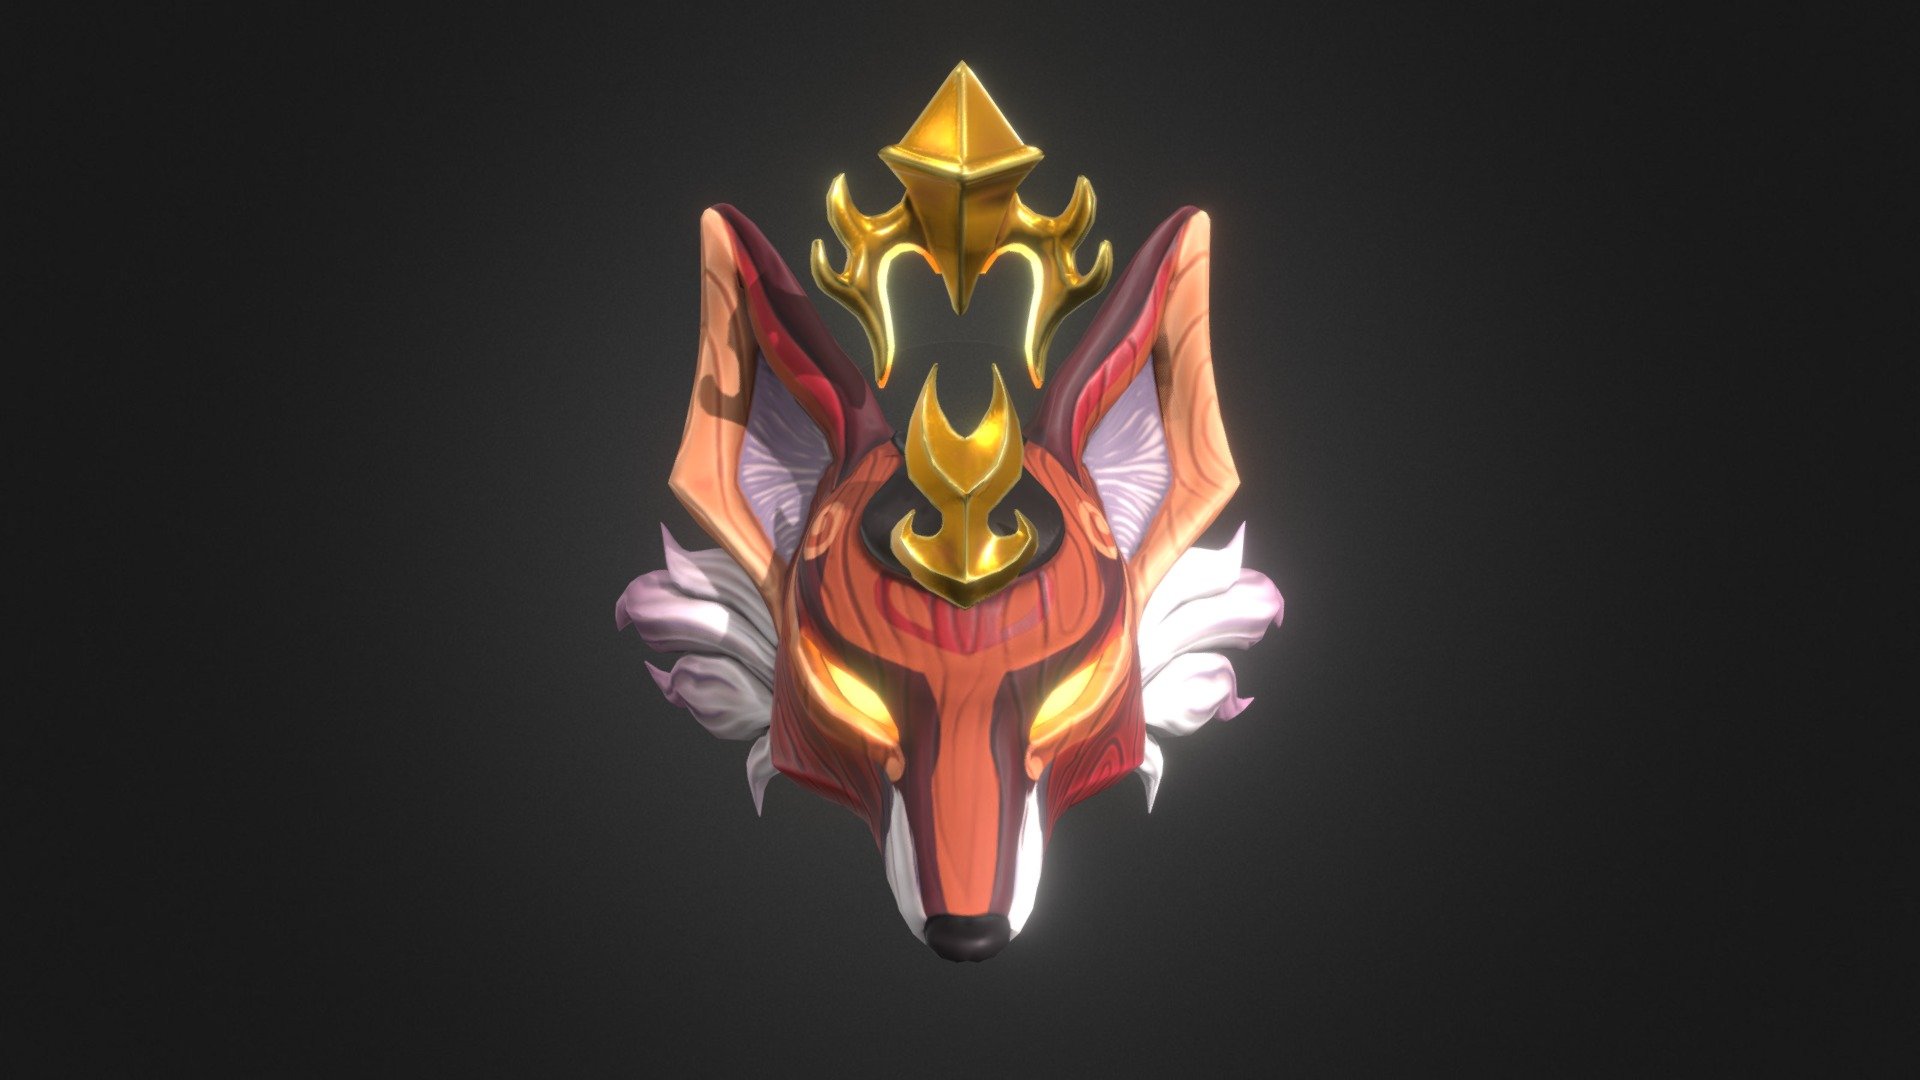 My animated stylised fox mask with hand painted textures and glowing eyes.

Modeled in Maya, sculpt in Zbrush, textures in Substance Painter. Based on my concept artwork 3d model